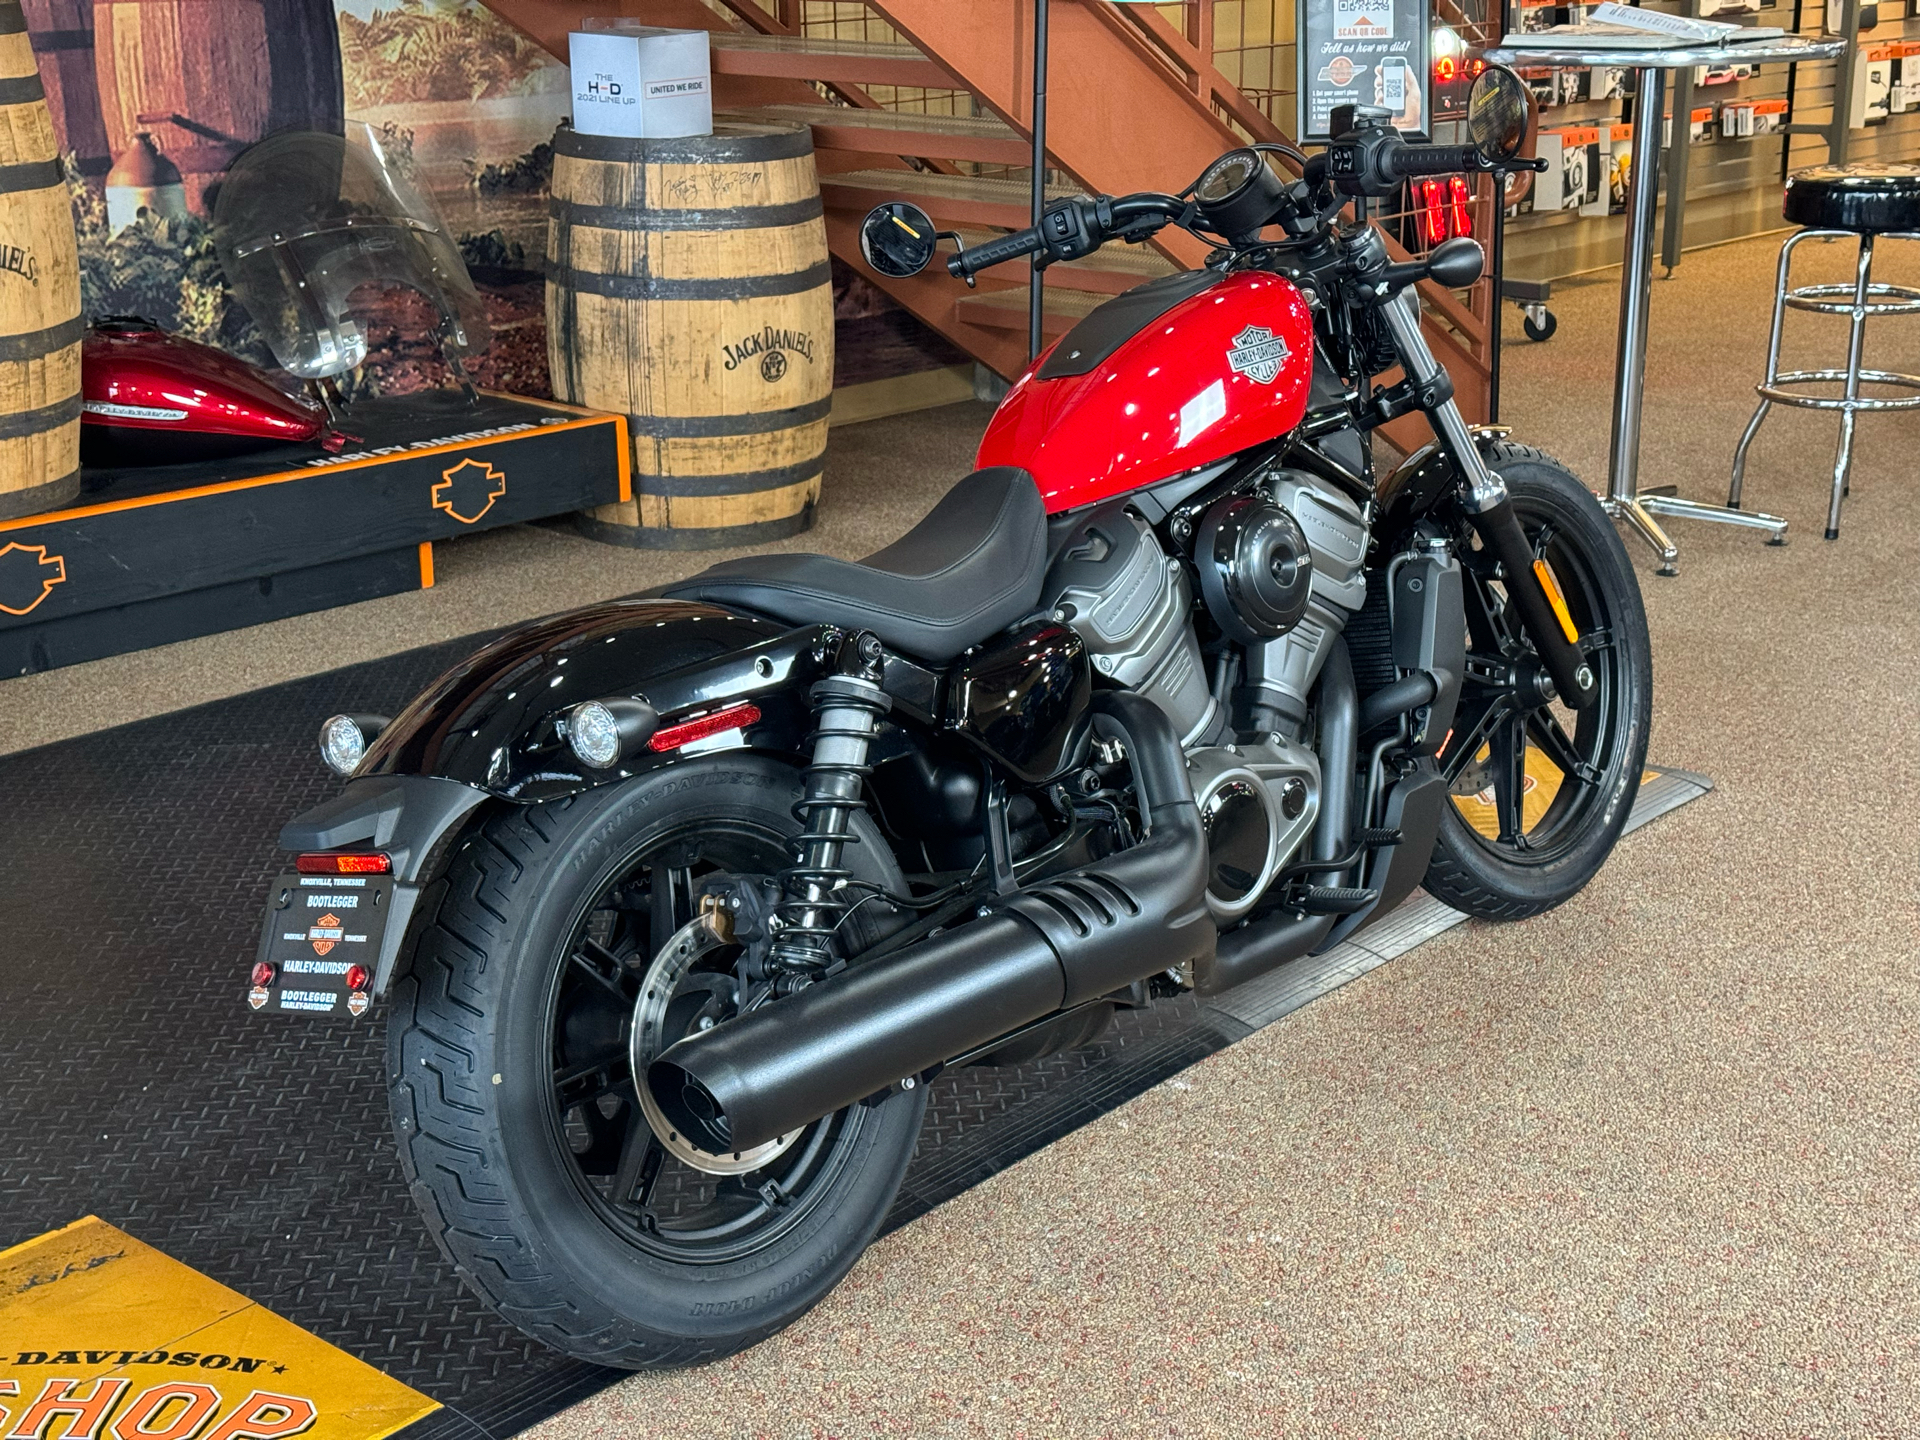 2023 Harley-Davidson Nightster® in Knoxville, Tennessee - Photo 9